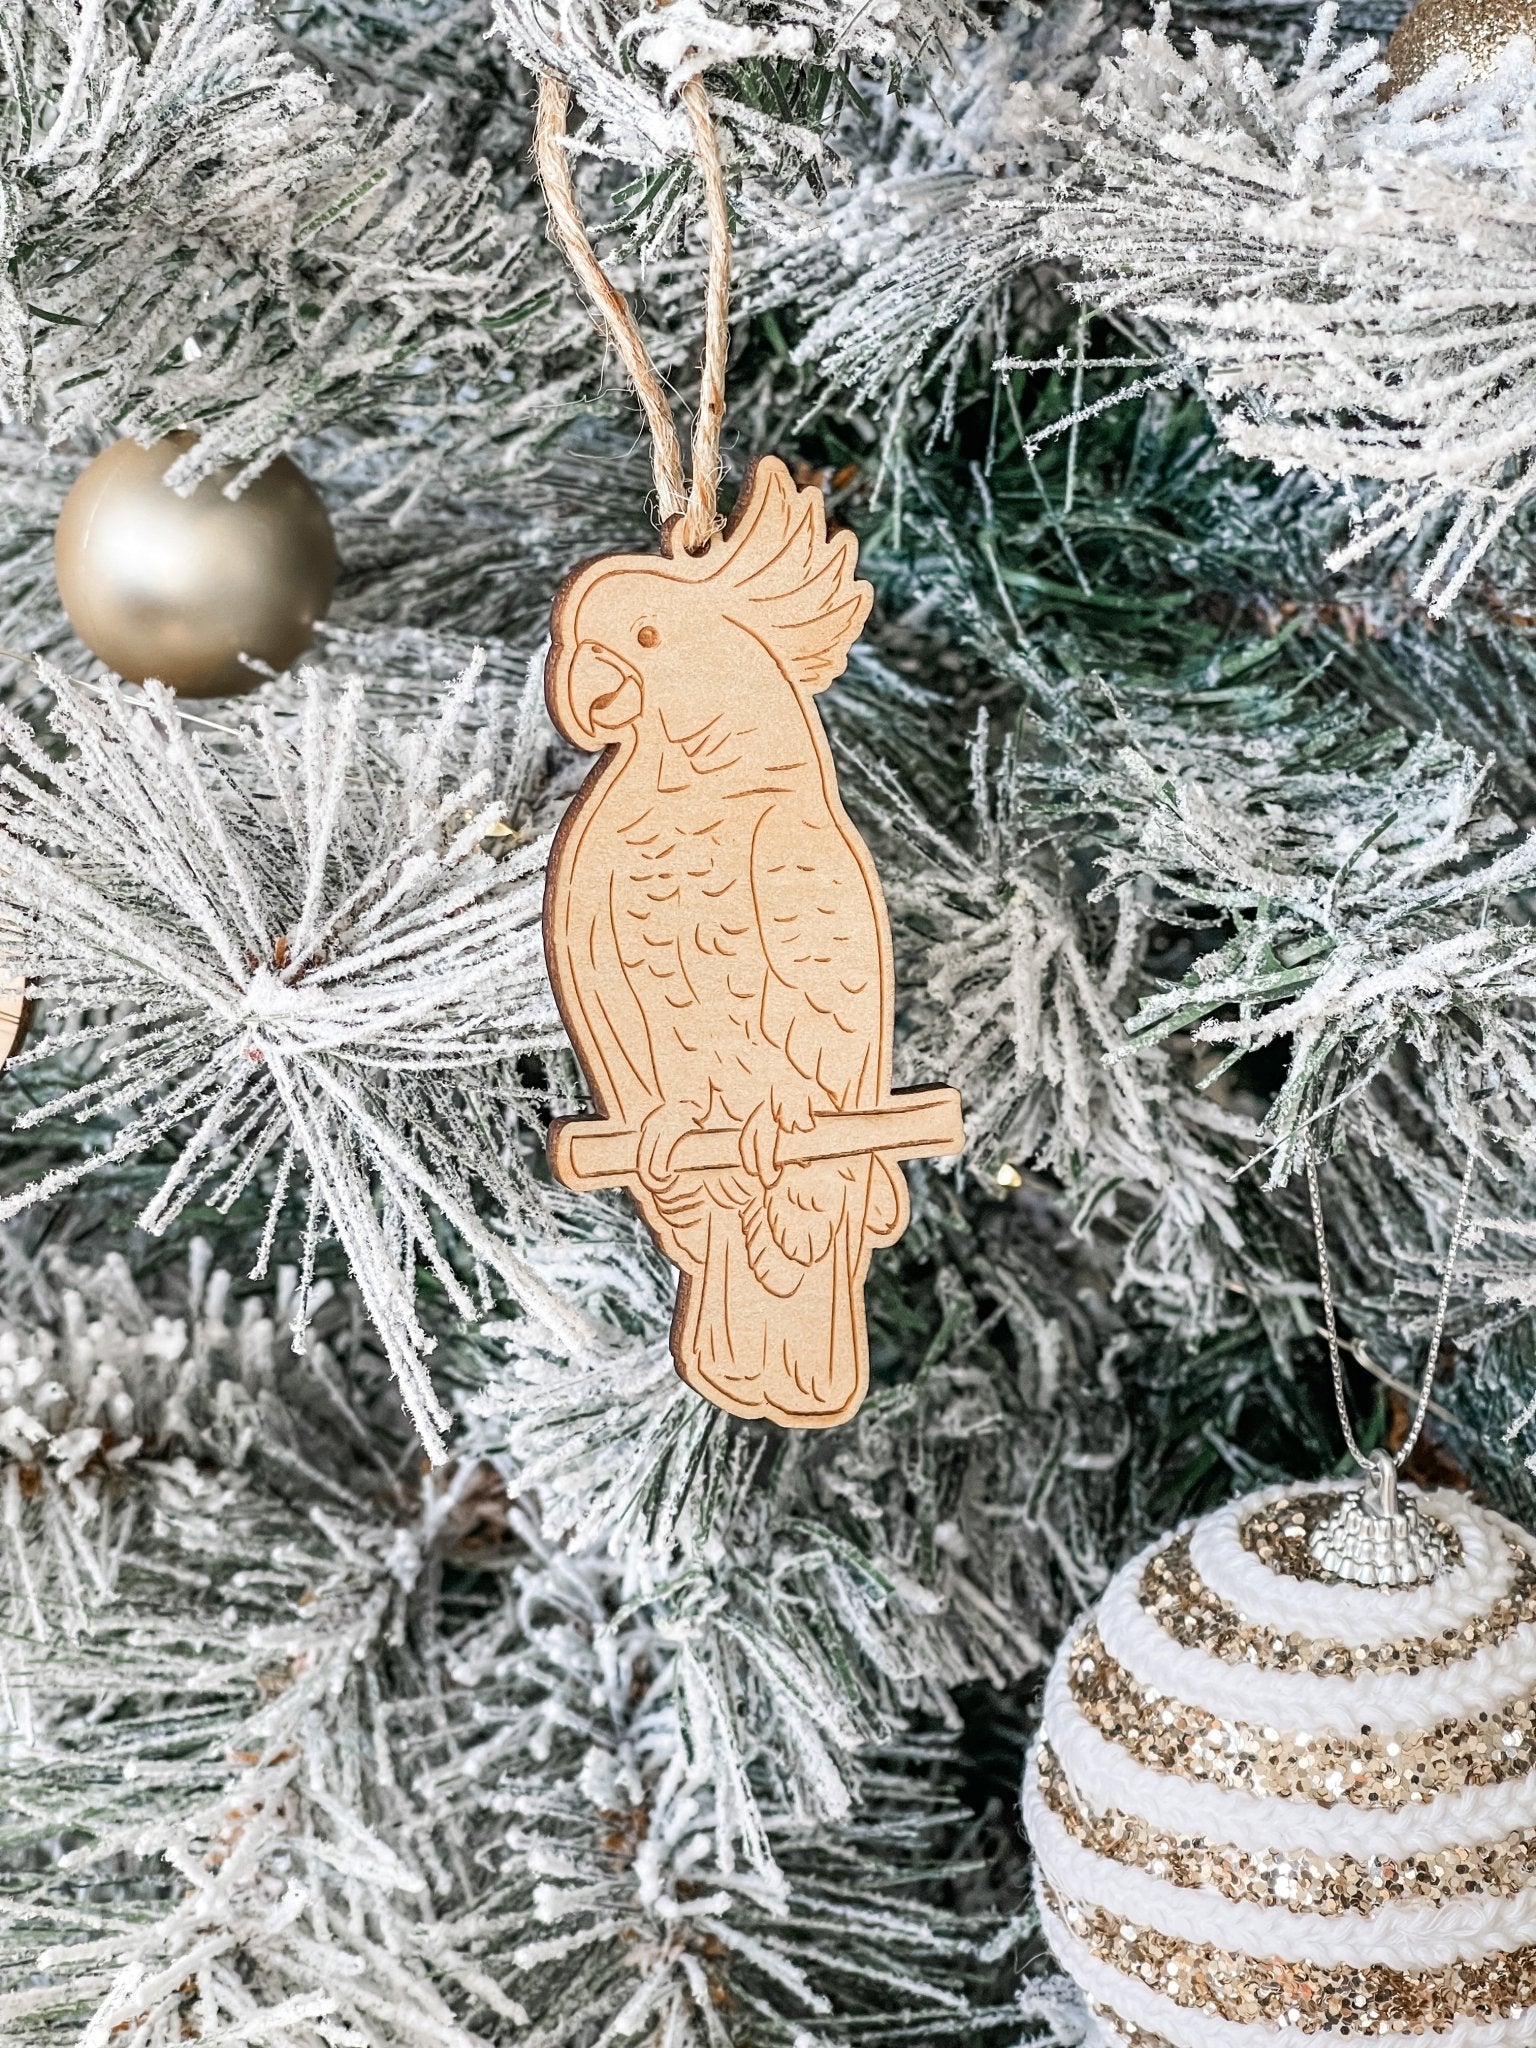 Aussie Animal Ornament - Cockatoo - The Humble Gift Co.